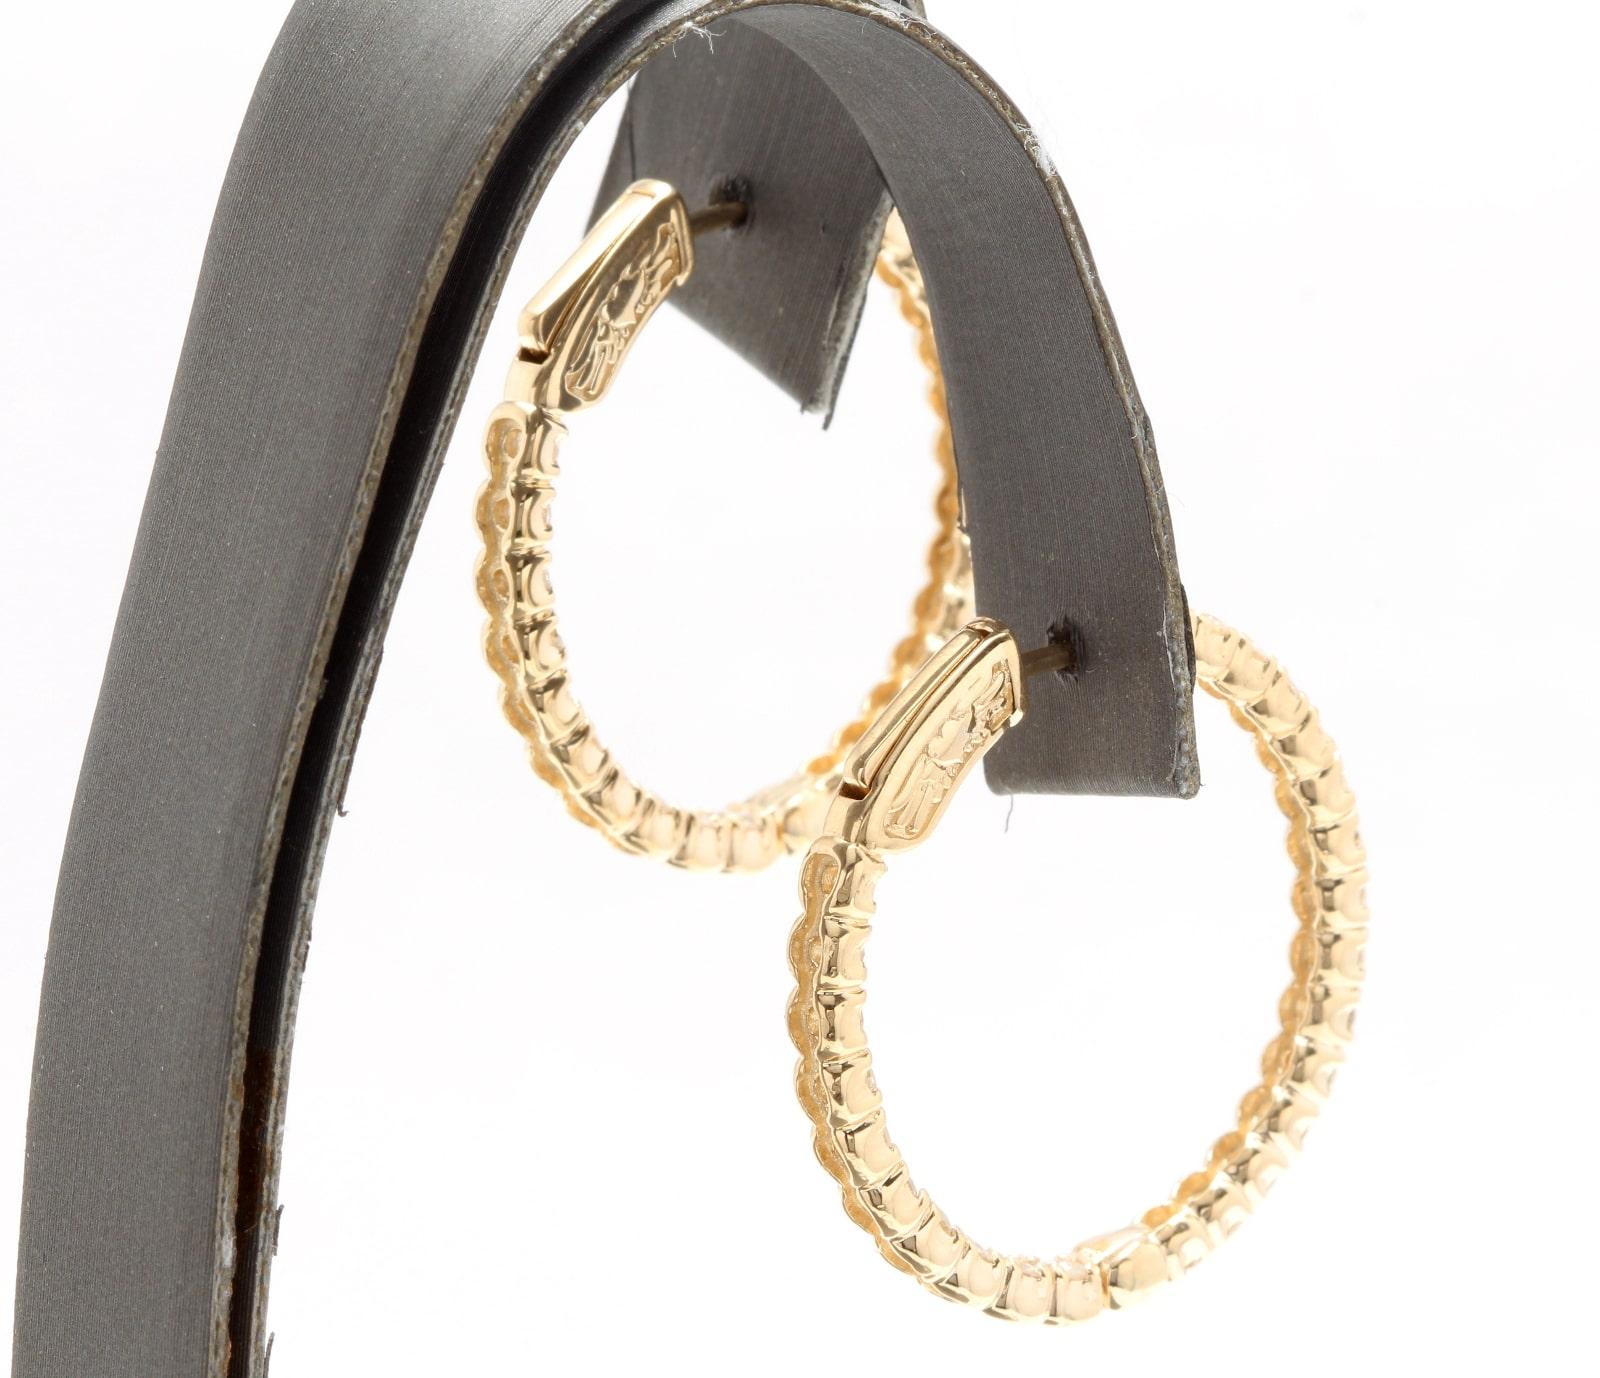 Exquisite 2.15 Carats Natural Diamond 14K Solid Yellow Gold Hoop Earrings

Amazing looking piece! 

Inside Out Diamonds.

Suggested Replacement Value $6,800.00

Total Natural Round Cut White Diamonds Weight: Approx. 2.15 Carats (color G-H / Clarity